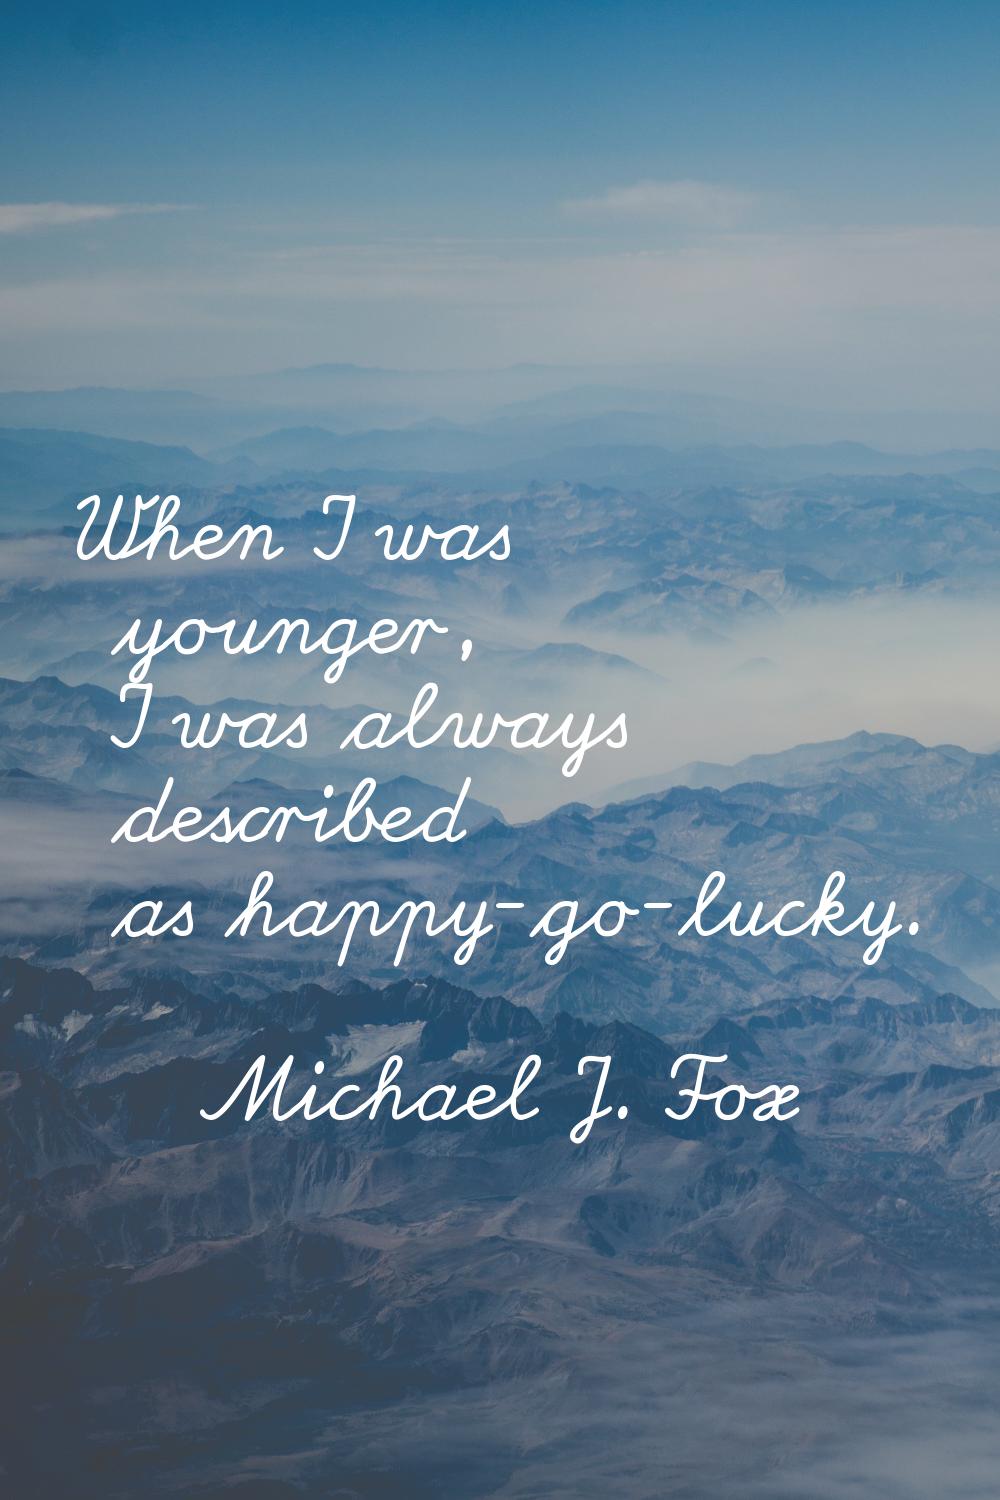 When I was younger, I was always described as happy-go-lucky.